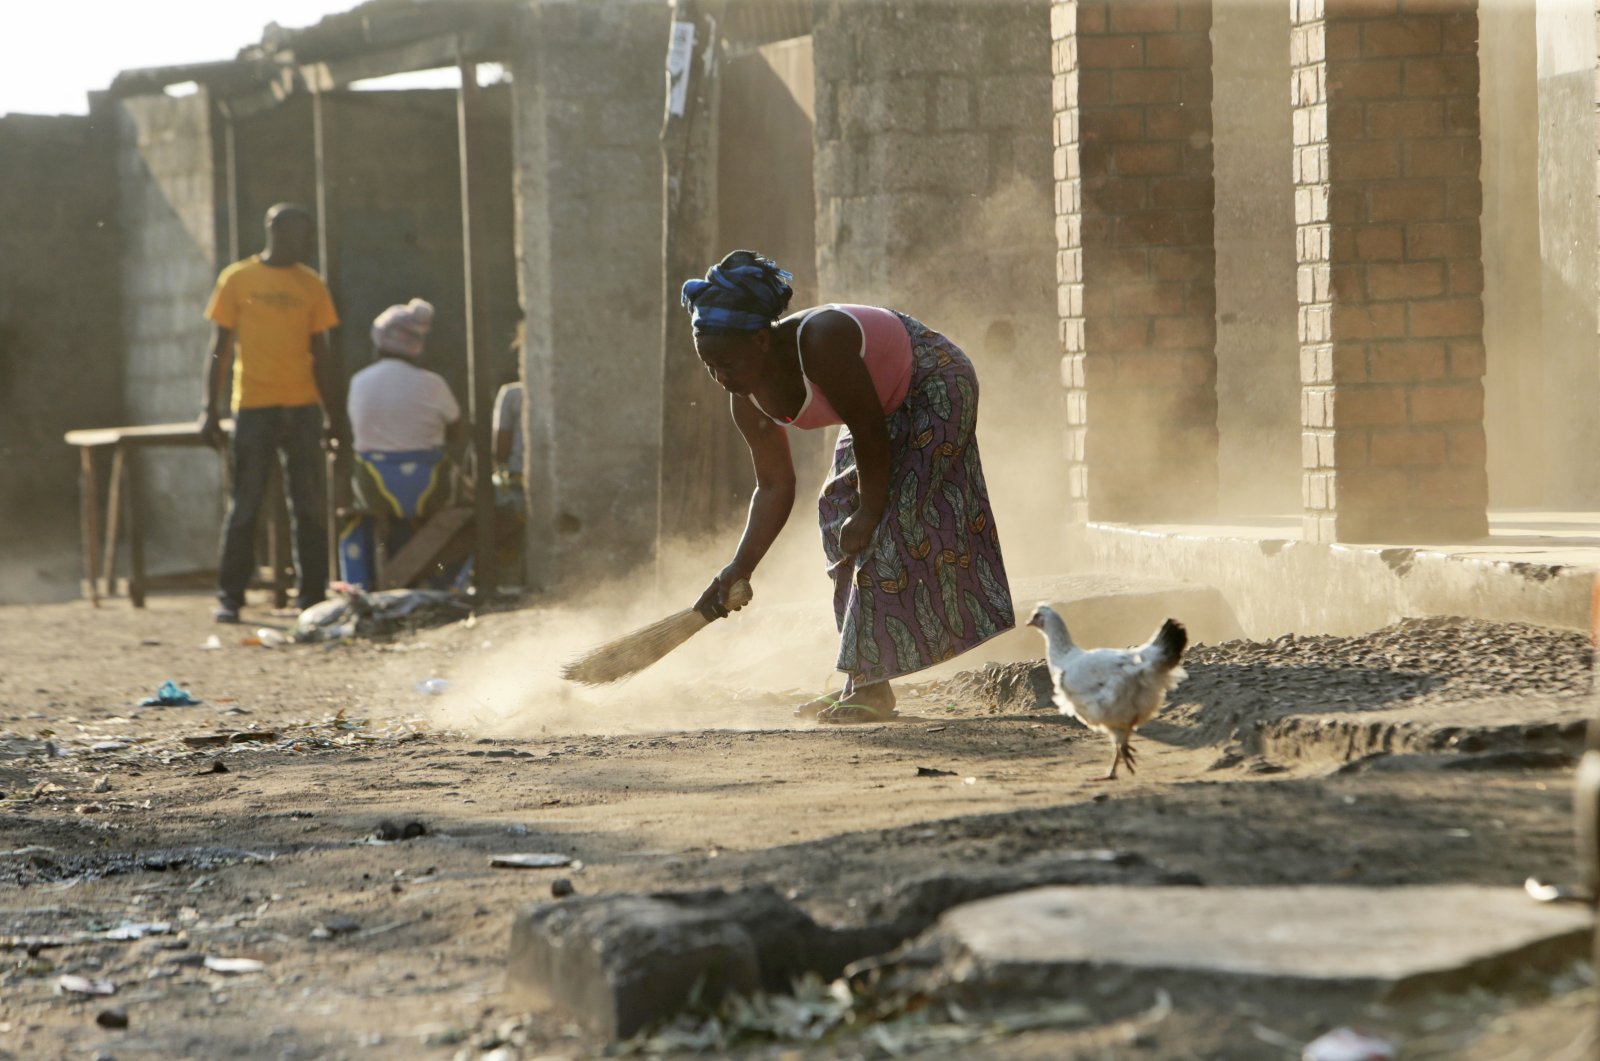 A woman is seen sweeping outside her house in Lusaka, Zambia, Aug. 14, 2021. (AP Photo)